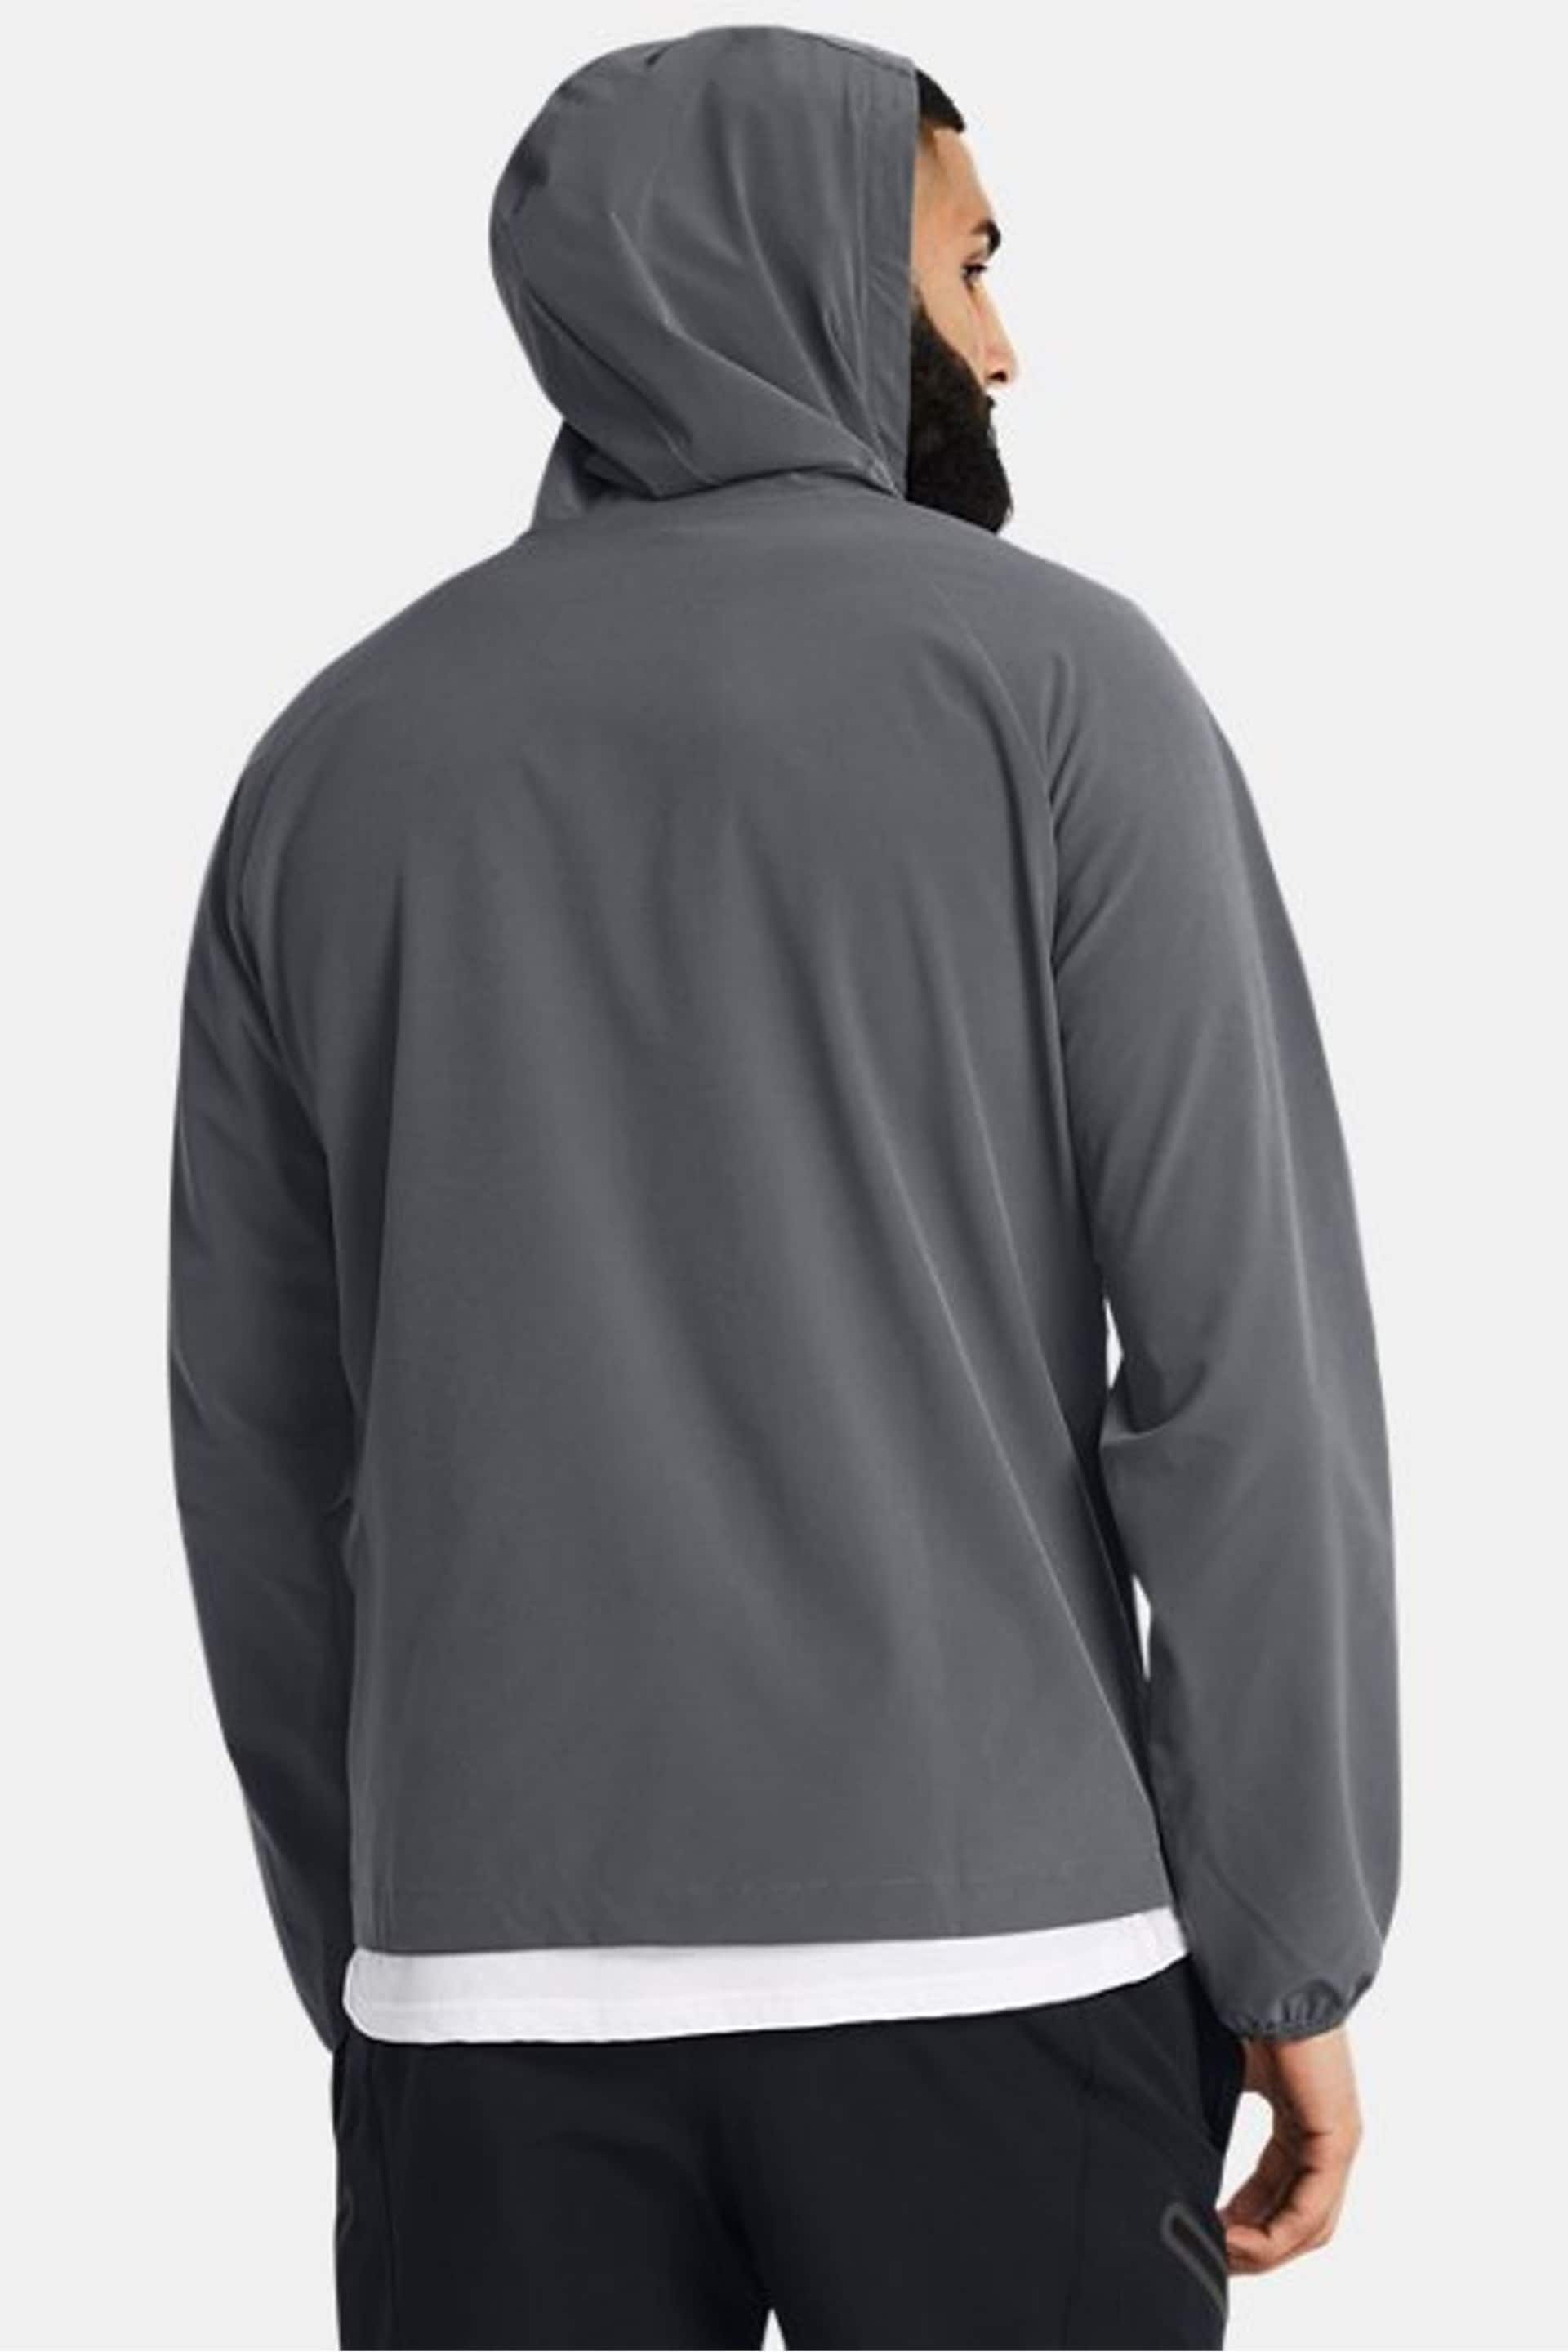 Under Armour Grey Stretch Woven Windbreaker - Image 2 of 2